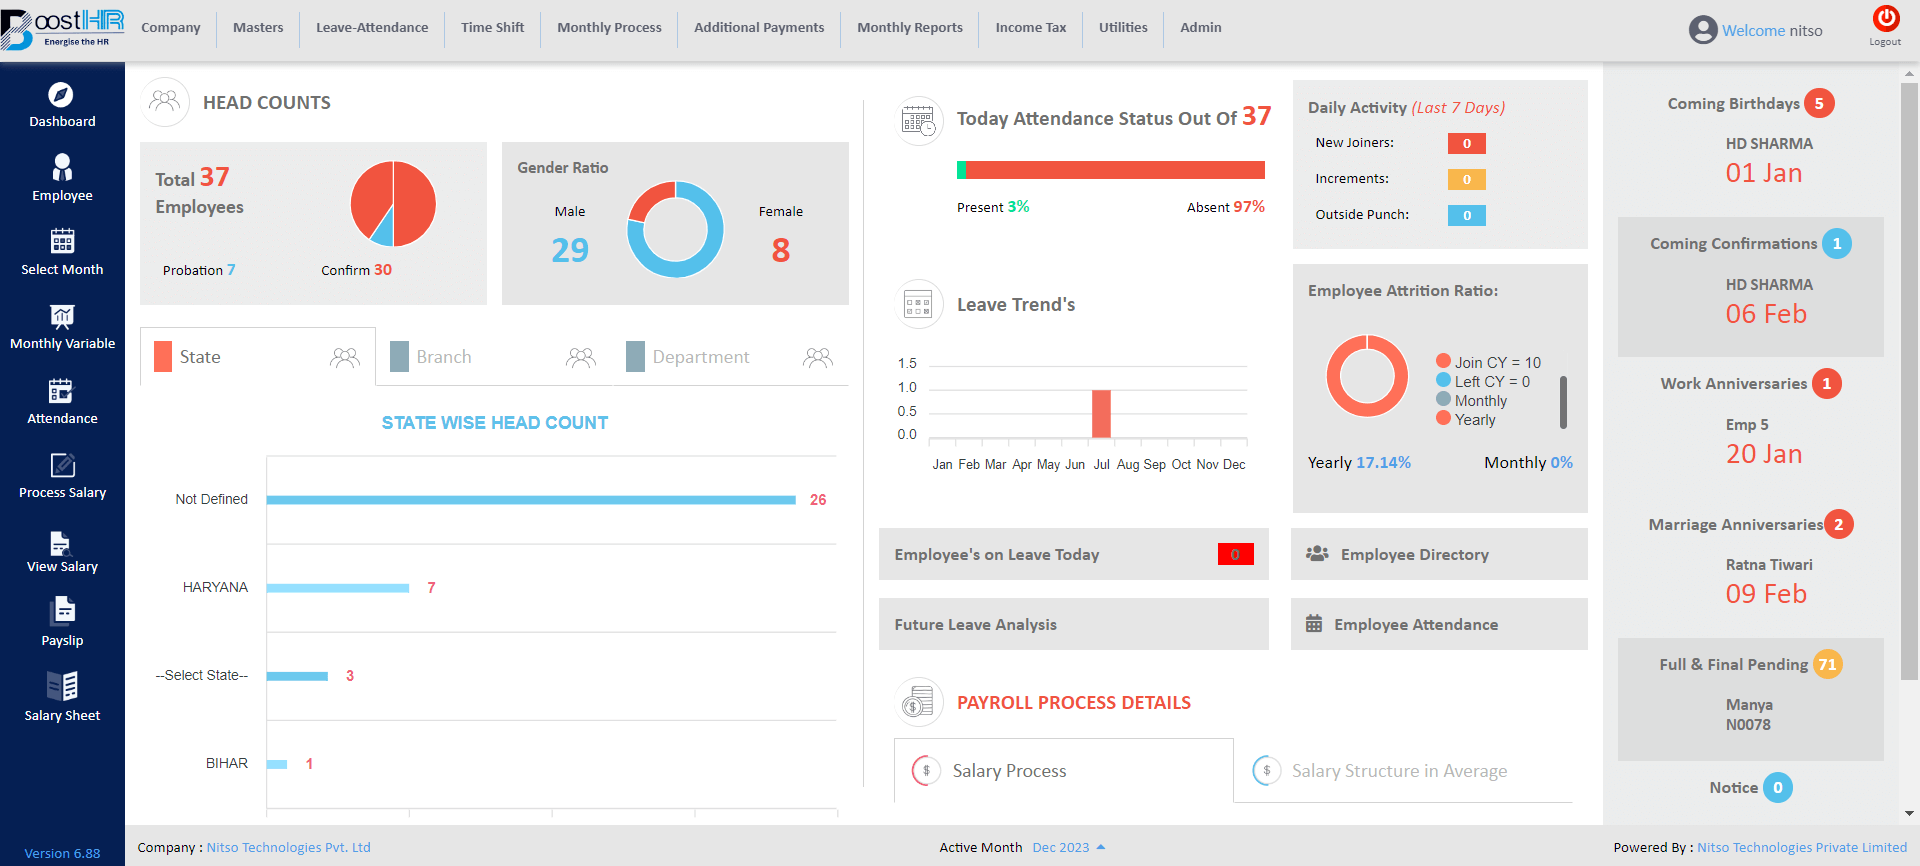 Best HR Software in India - Nitso HRMS Dashboard